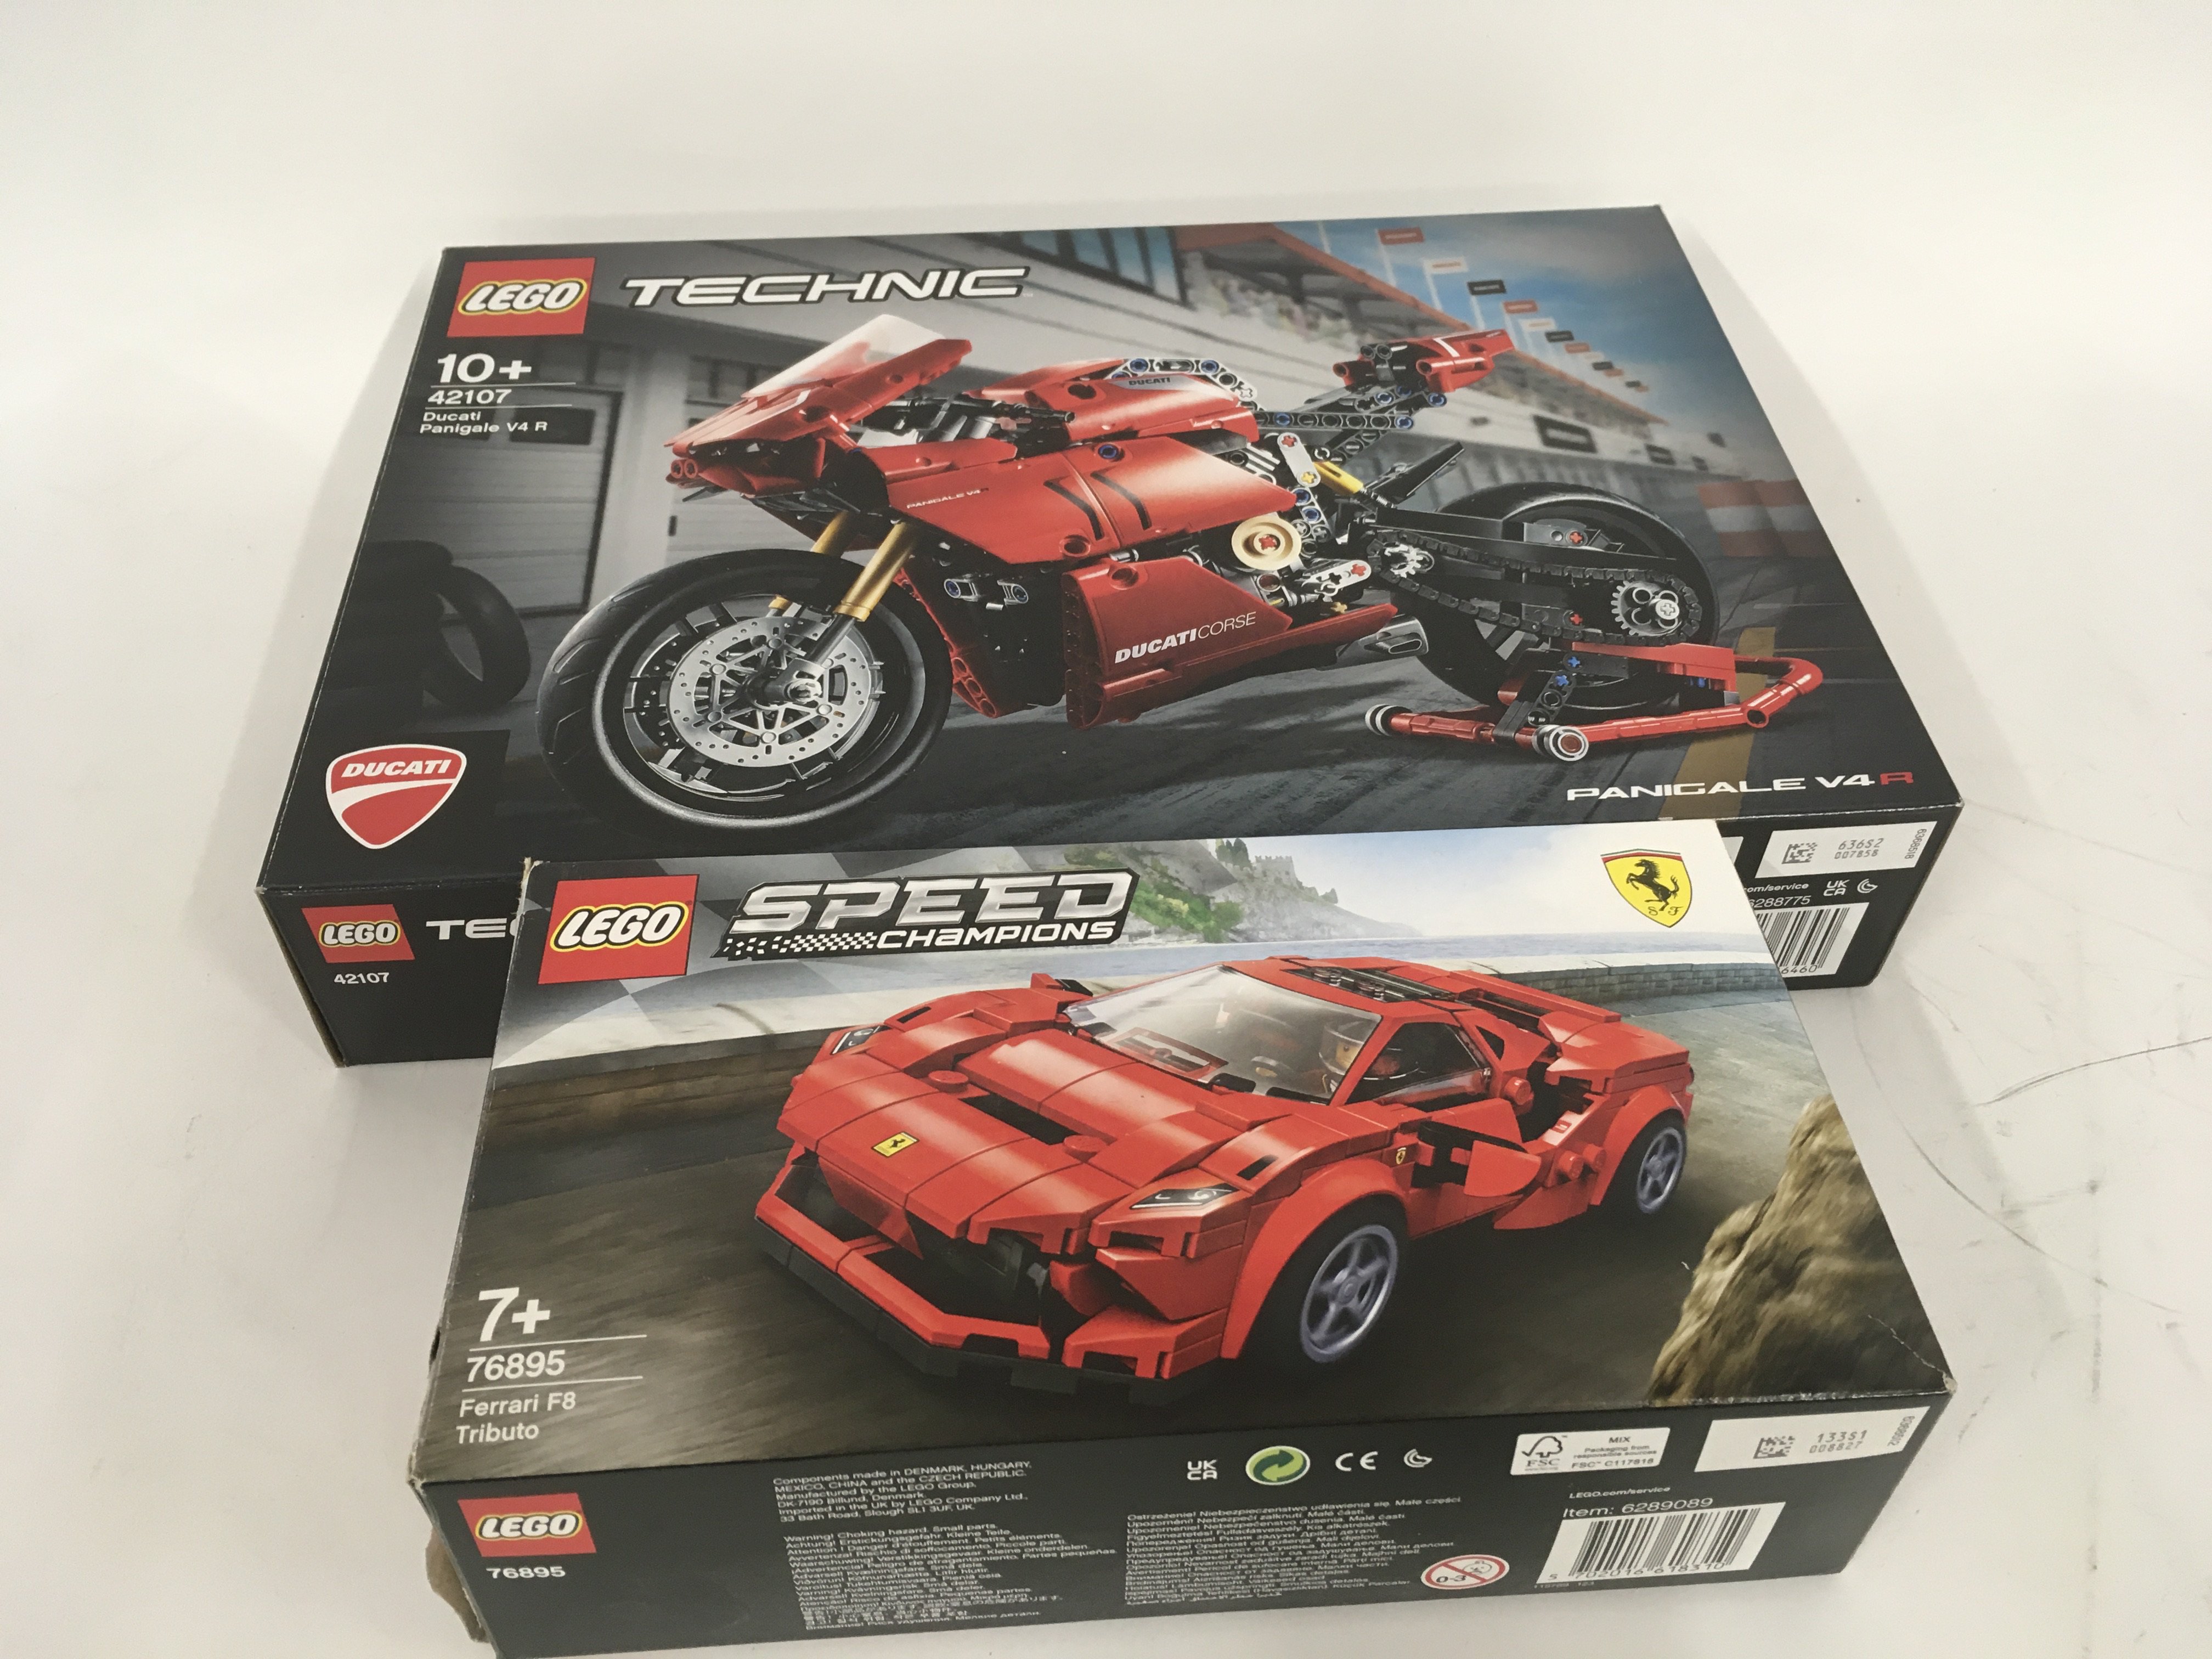 2 boxed Lego sets. 42107 Ducati Panigale V4R. and. 76895 Ferrari F8 Tributo. Previously assembled